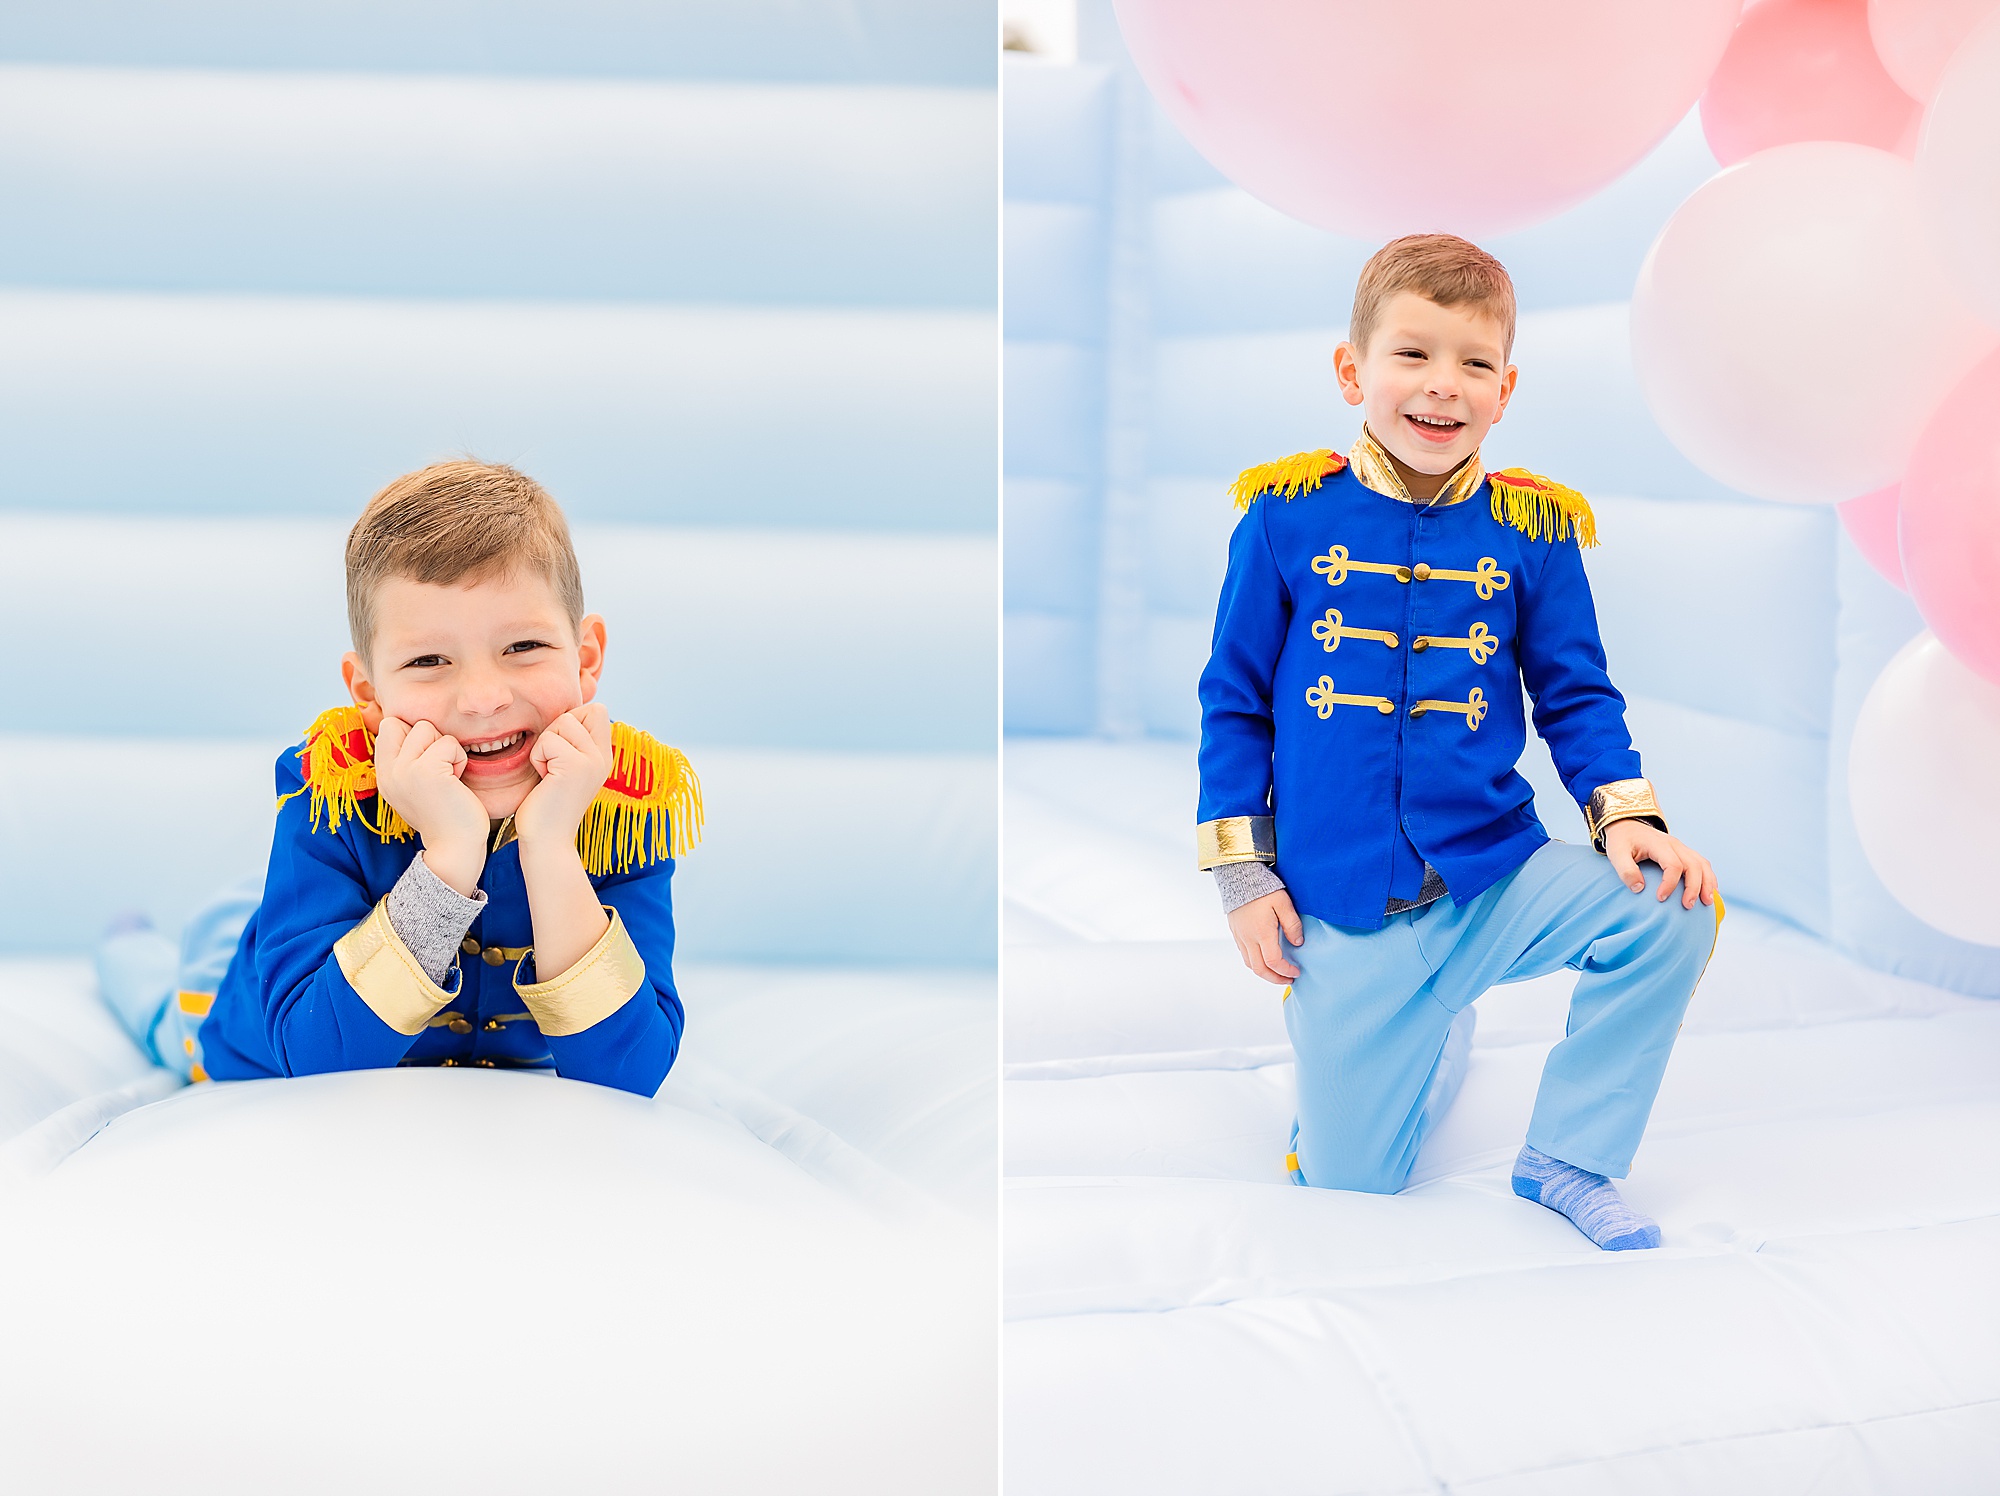 brother poses in prince costume during Princess themed first birthday party